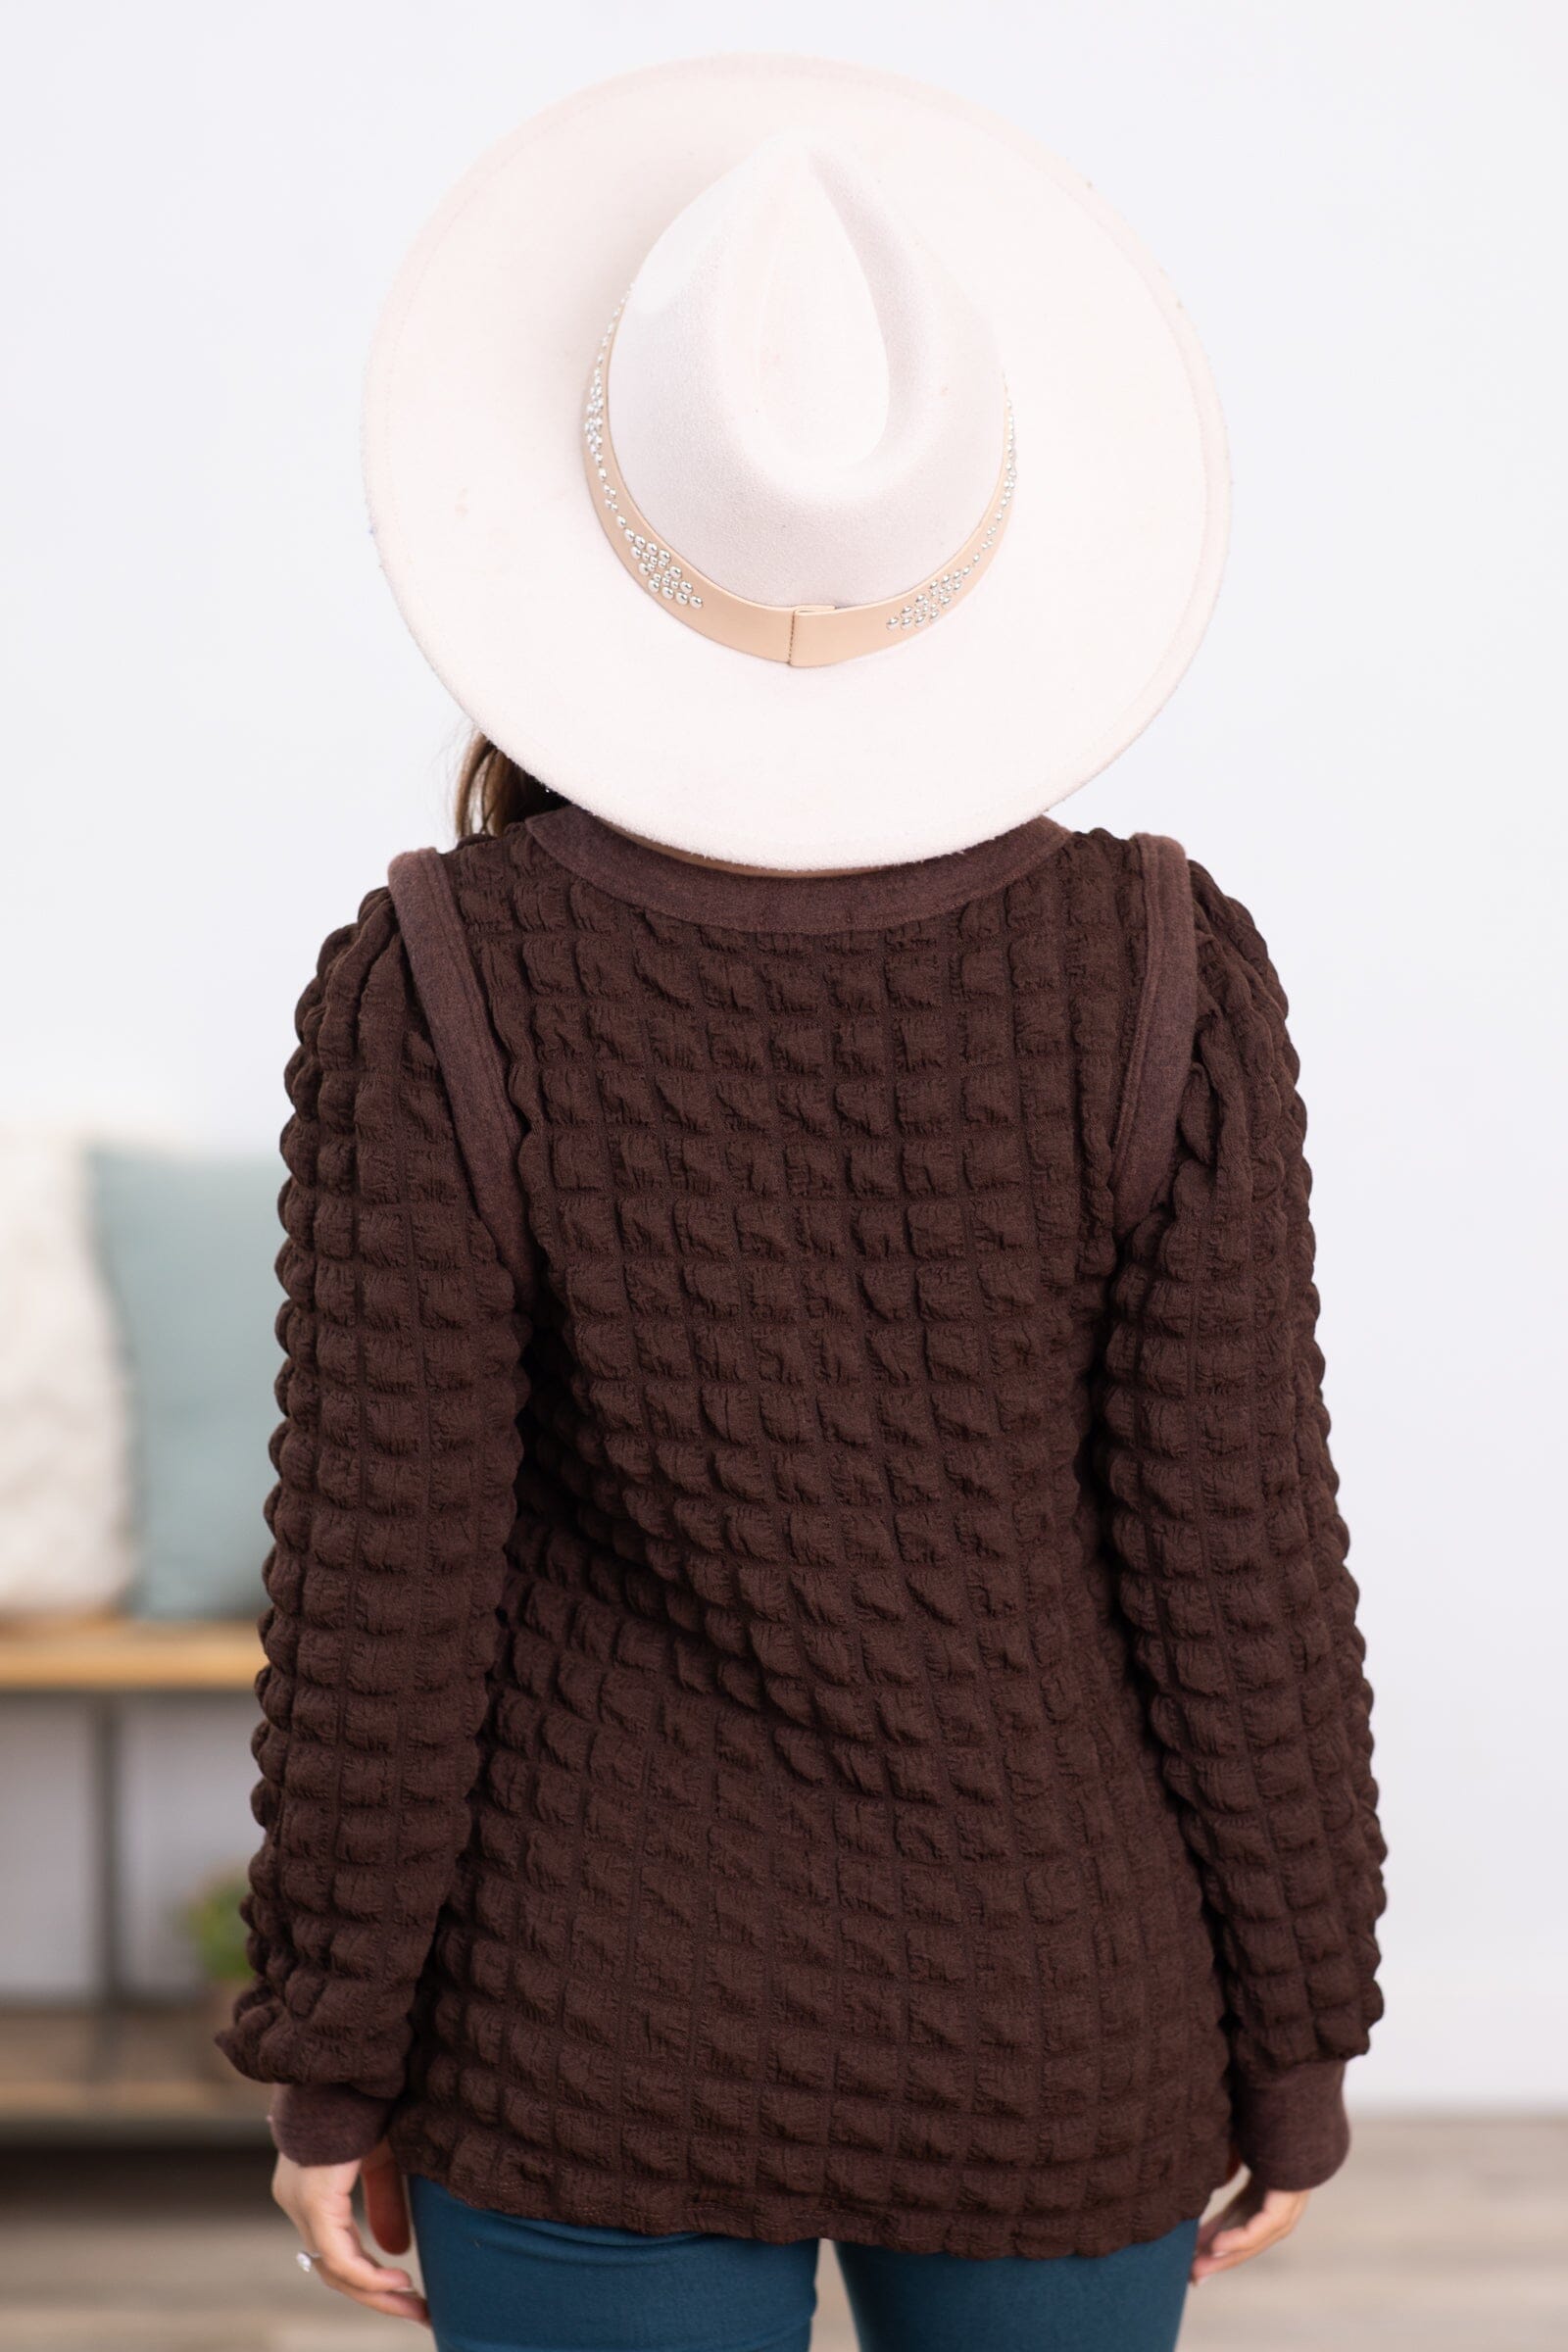 Brown Puff Textured Long Sleeve Top - Filly Flair